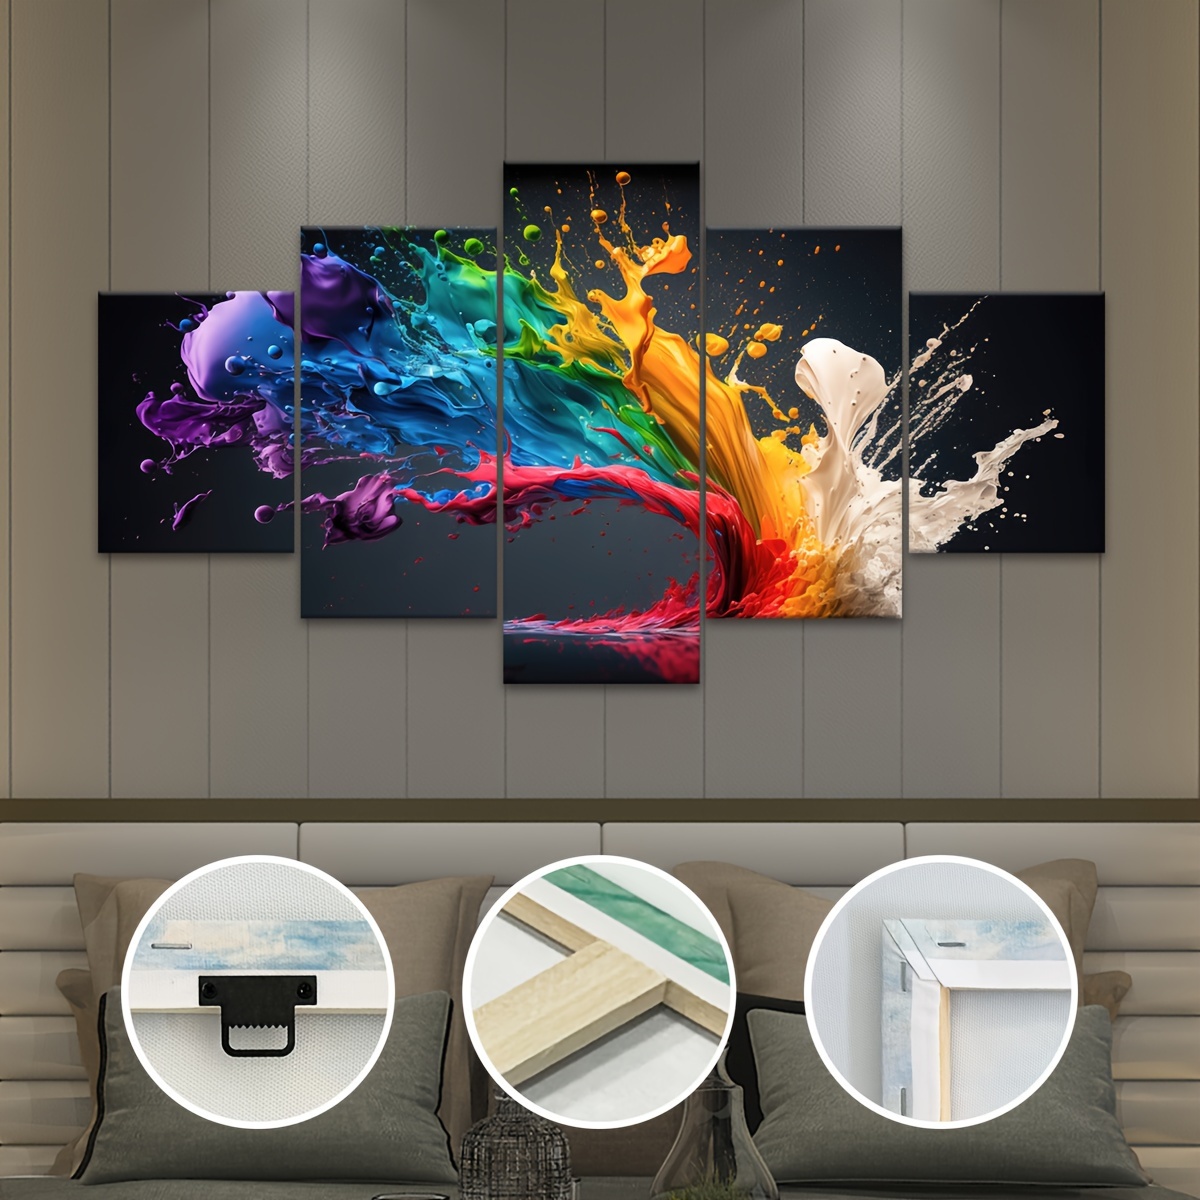 

5pcs/set Wooden Framed Canvas Poster, Modern Art, Colorful Ink Painting Canvas Poster, Ideal Gift For Bedroom Living Room Corridor, Wall Art, Wall Decor, Winter Decor, Wall Decor, Room Decoration